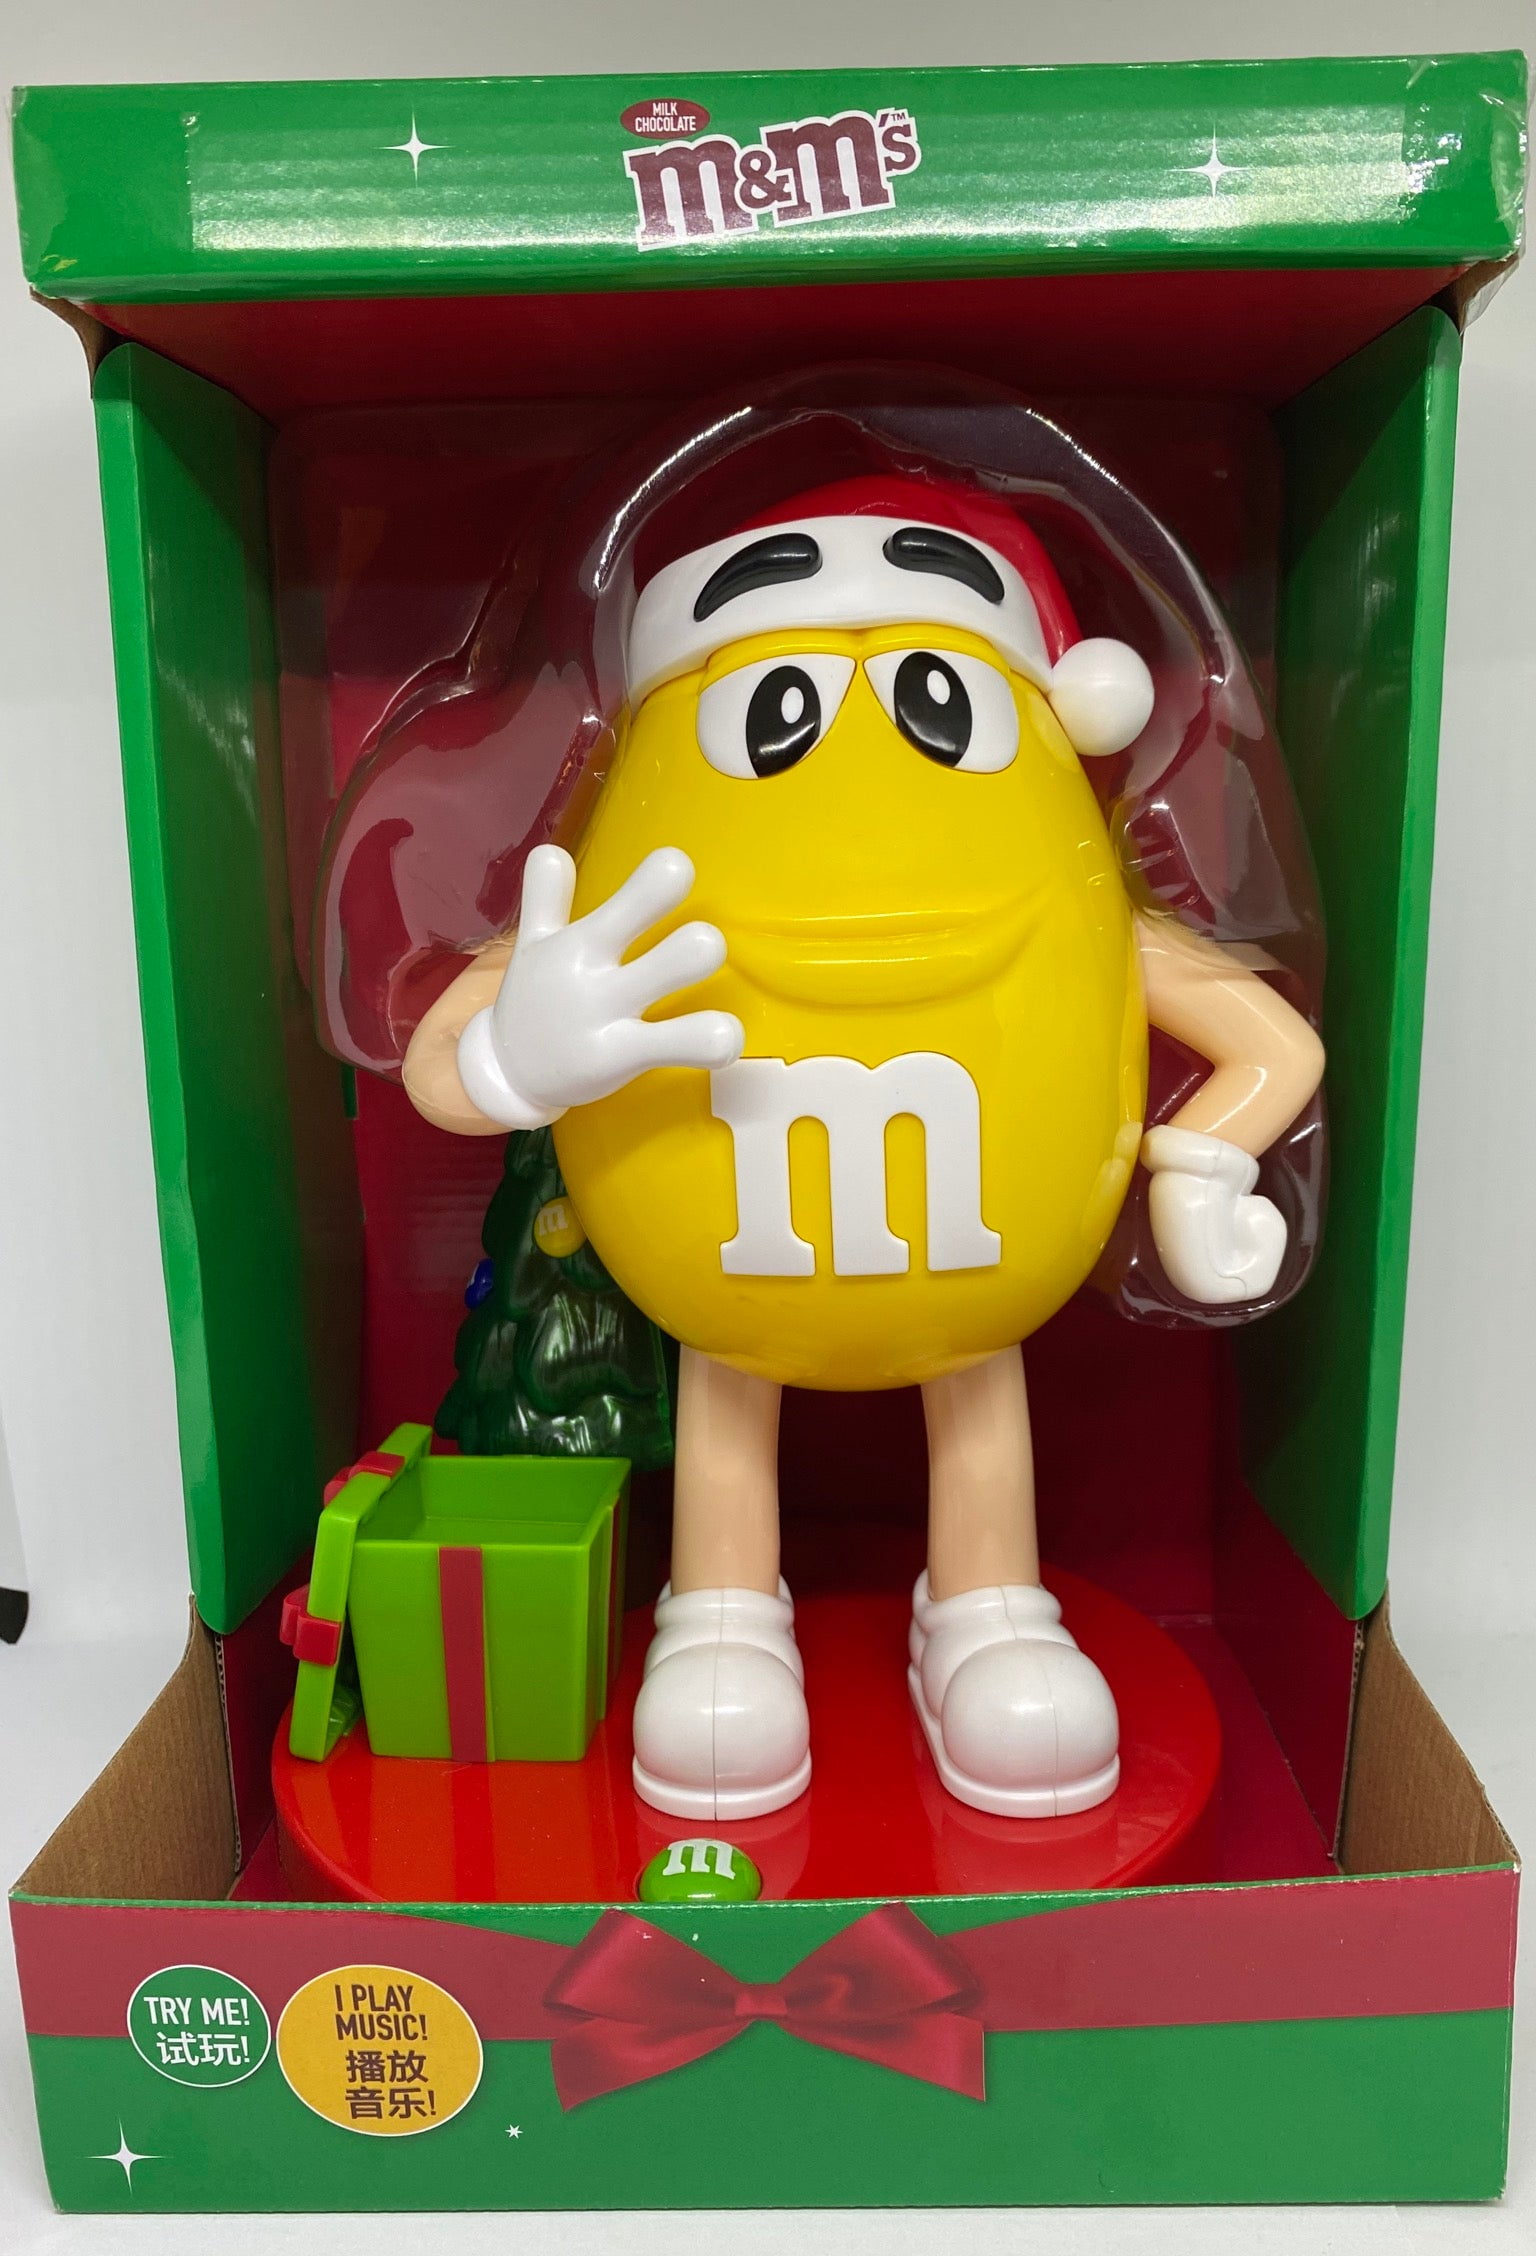 20cm M&M's Candy Refillable Dispenser Dispensing Machine 45g Sweet  Yellow or Red